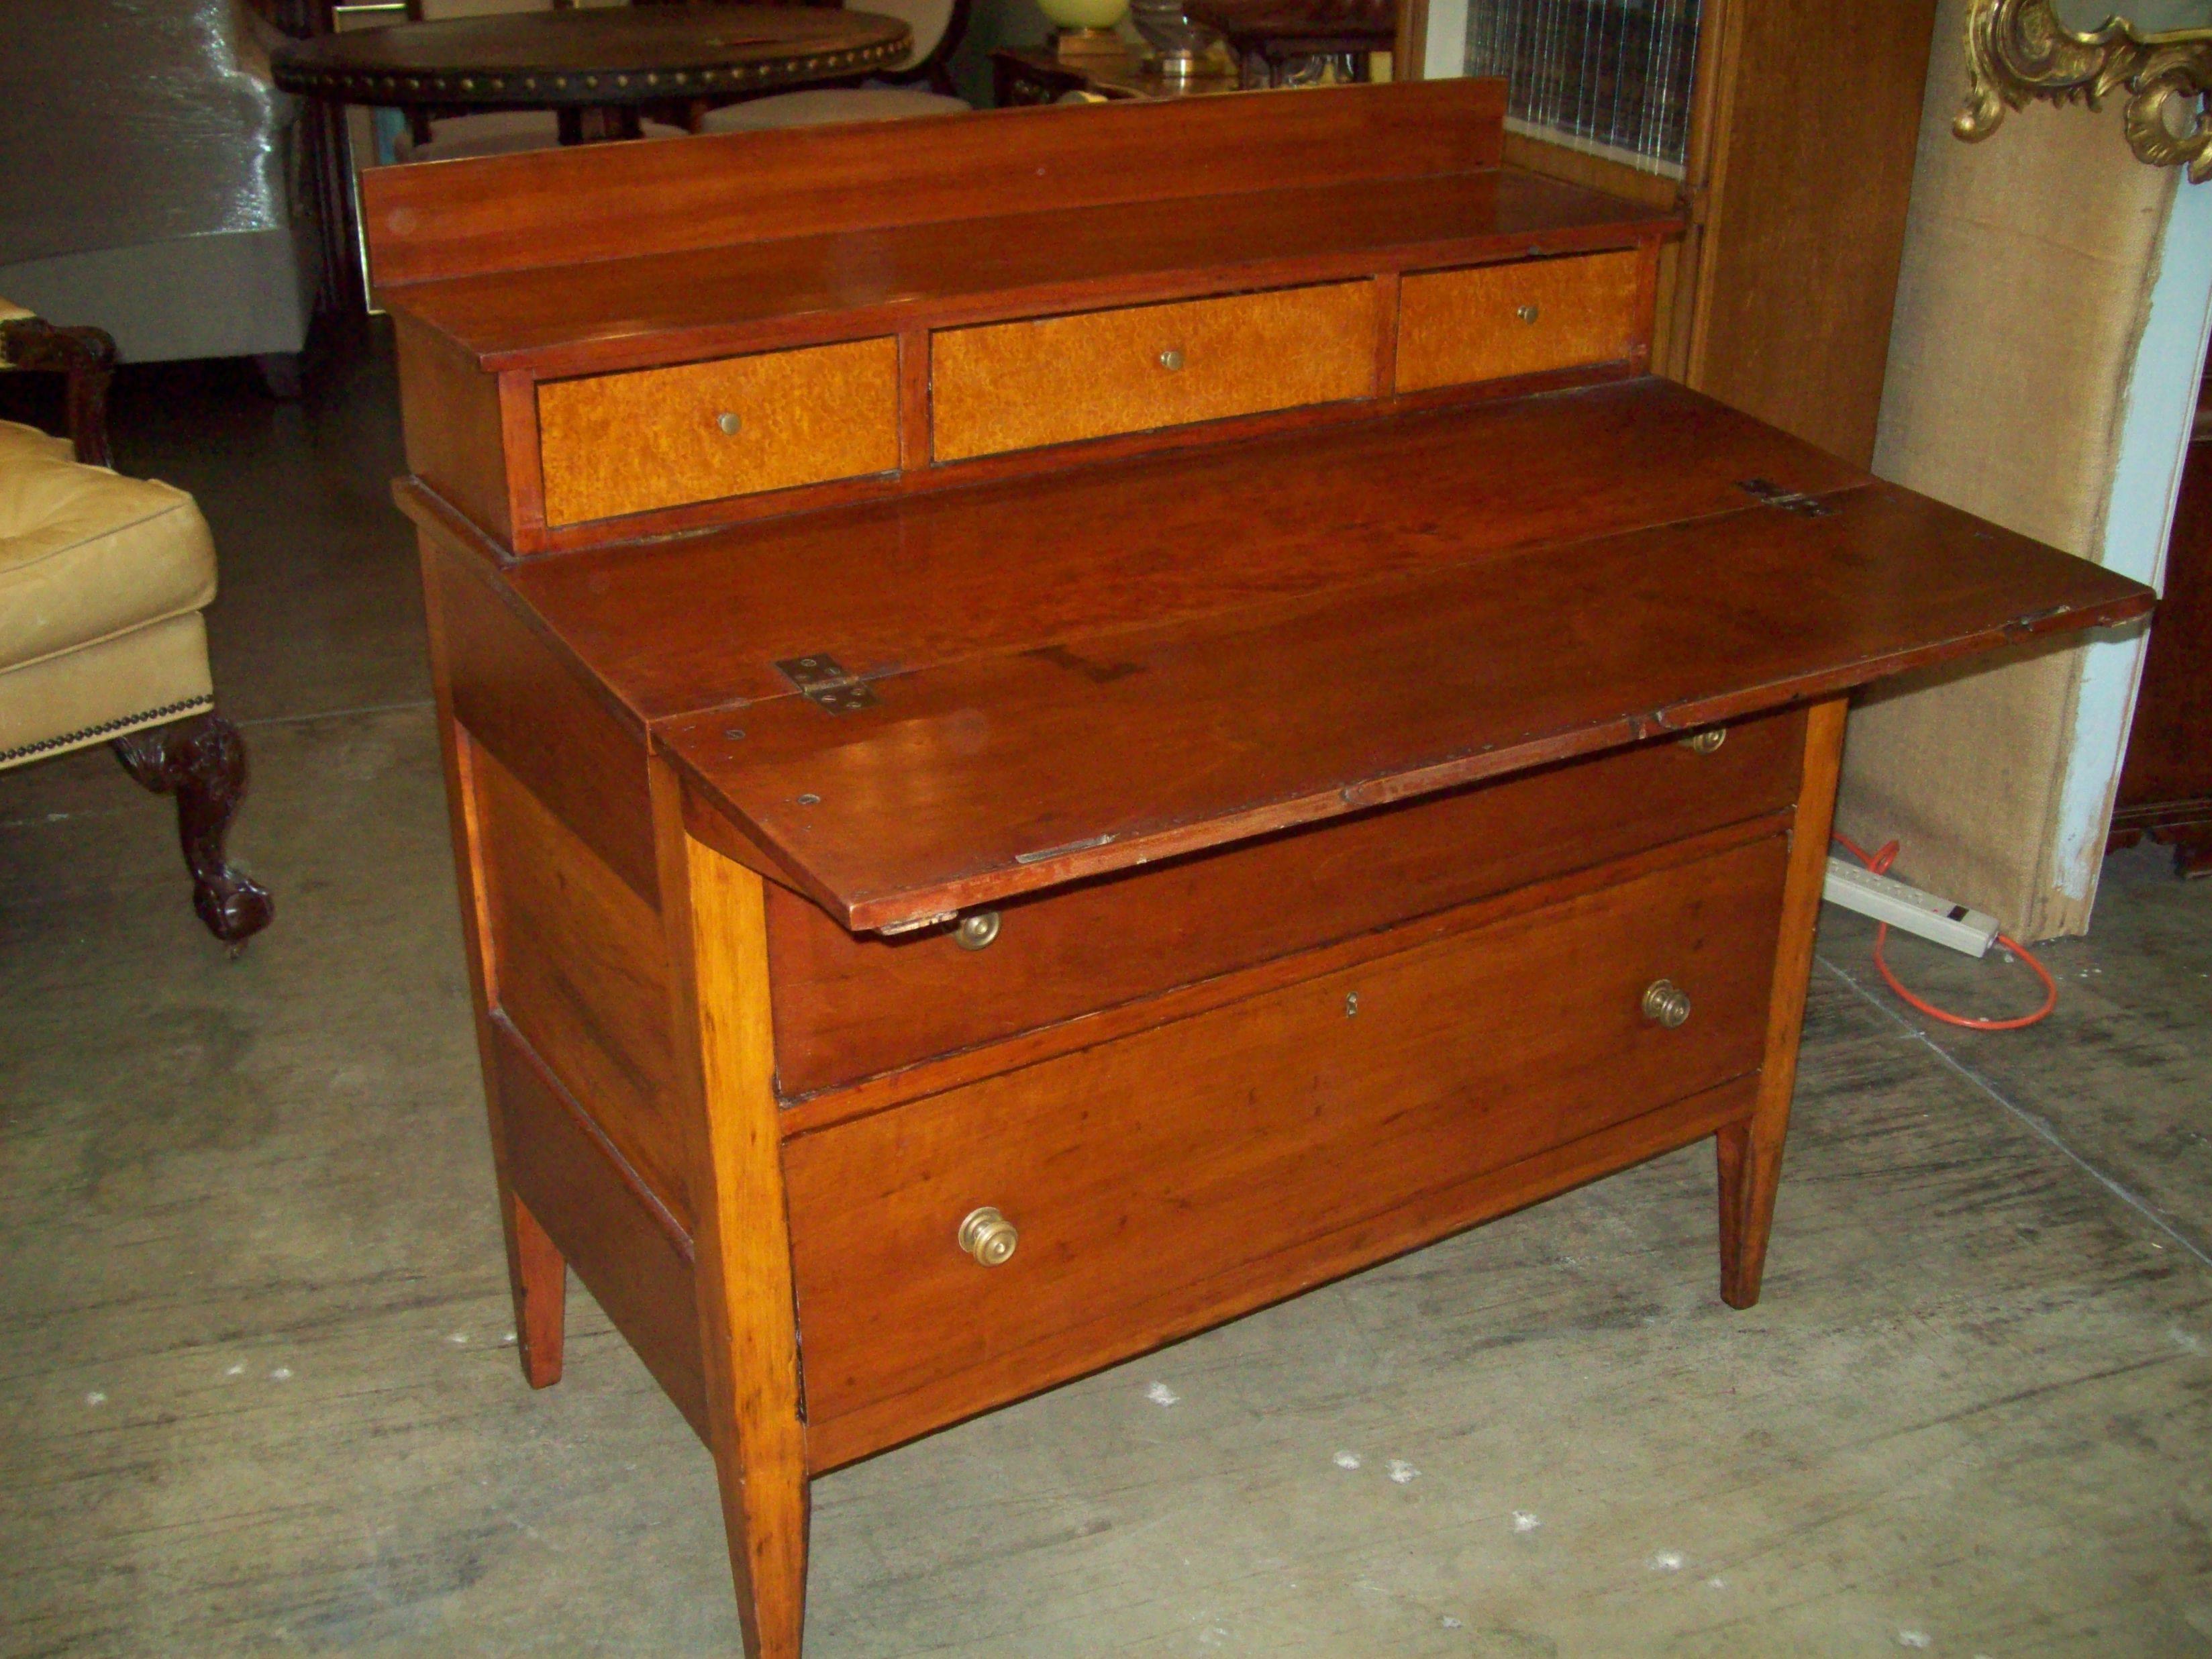 Hand-Crafted American Cherry Desk For Sale